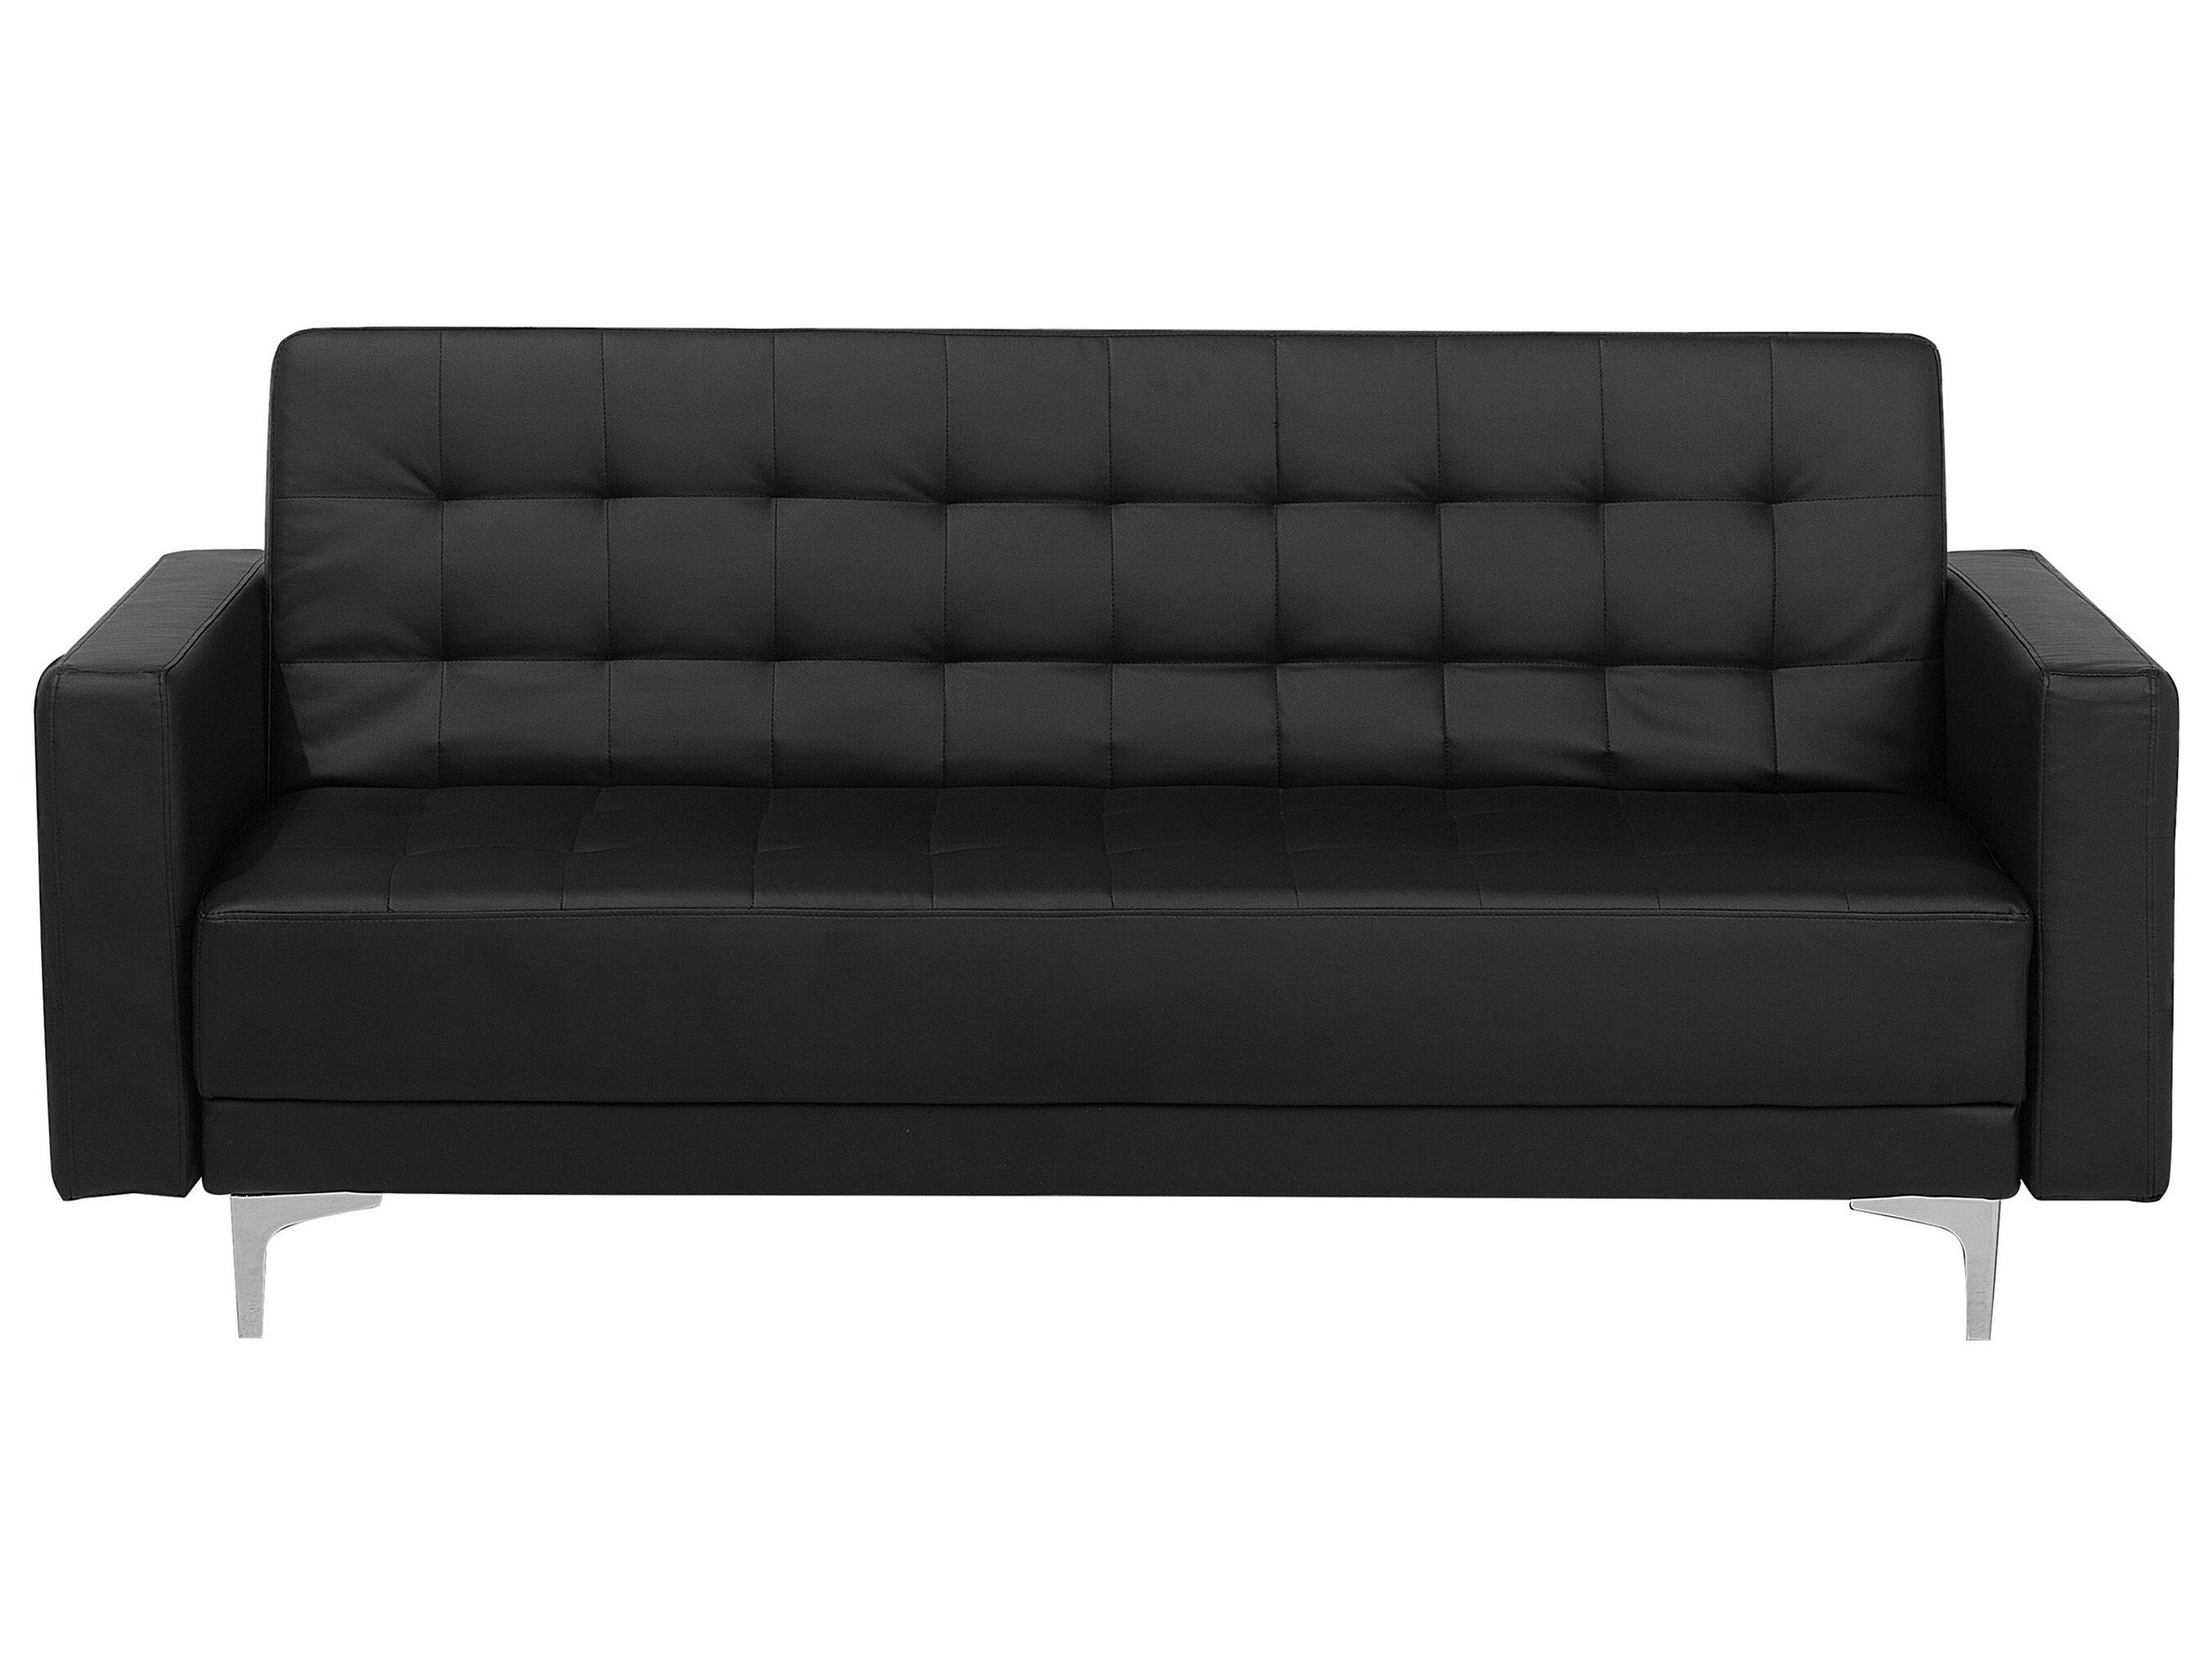 Seater Faux Leather Sofa Bed Black ABERDEEN | atelier-yuwa.ciao.jp